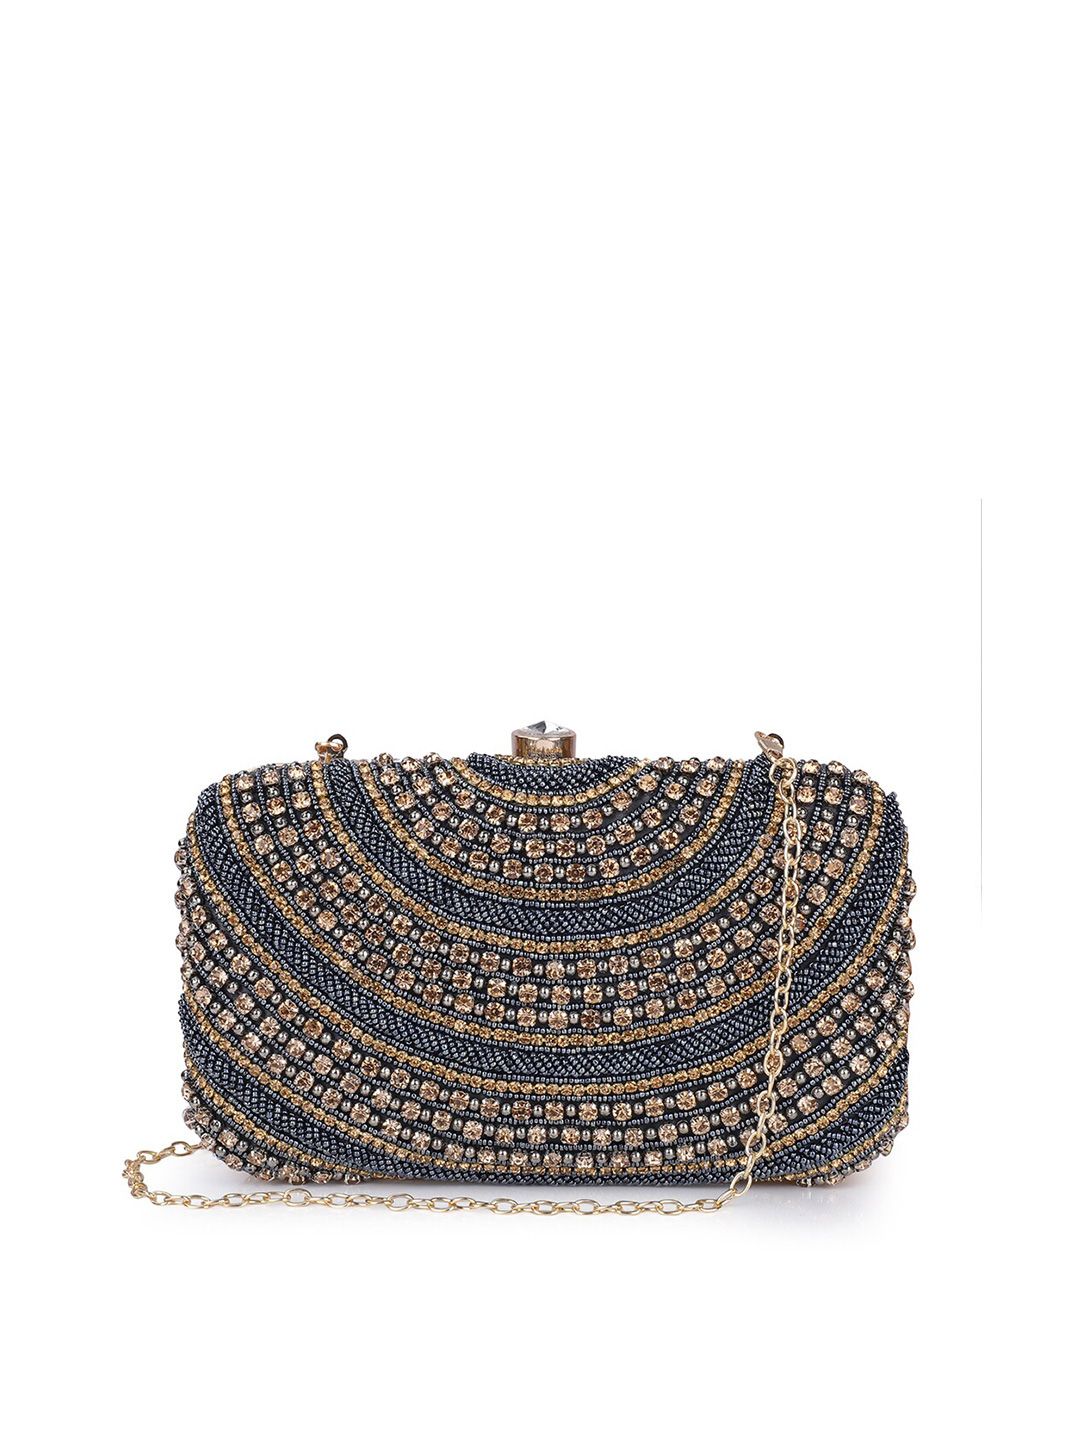 THE CLOWNFISH Women Blue & Gold-Toned Embellished Envelope Price in India